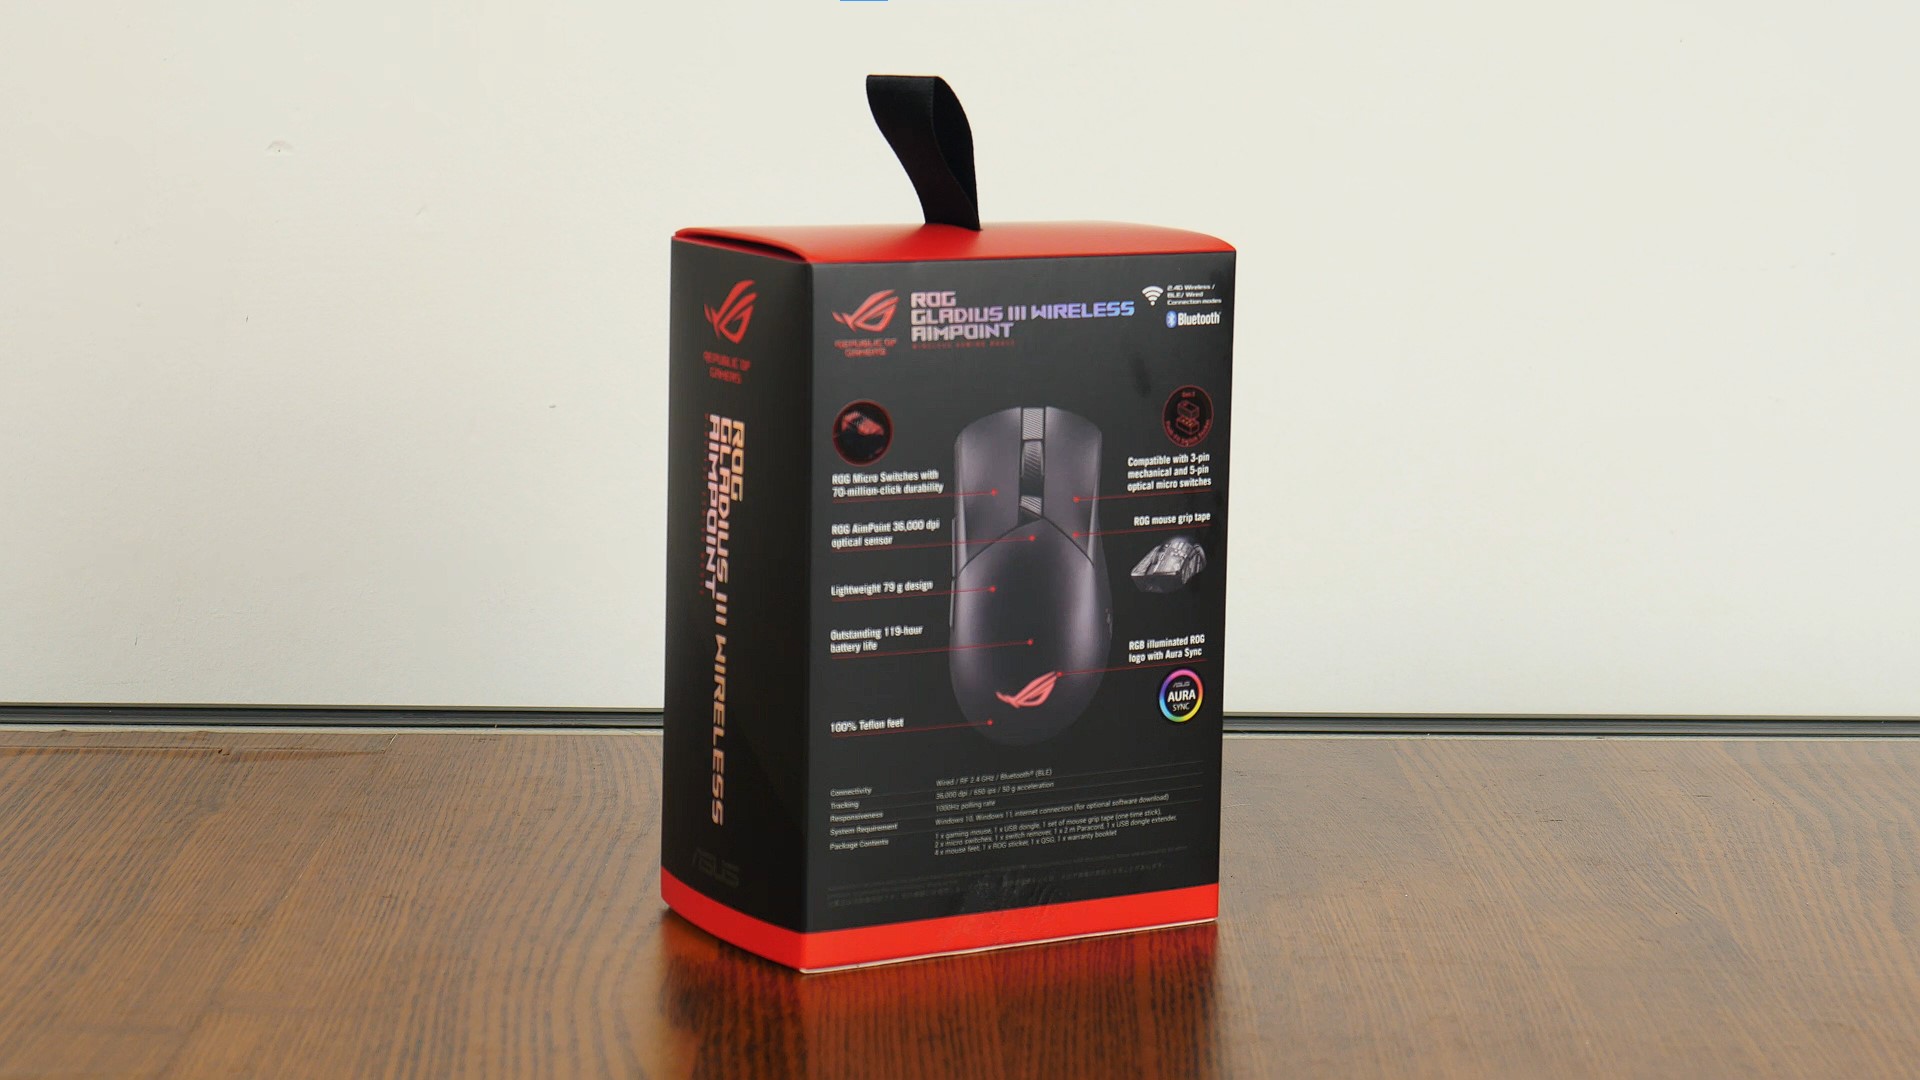 ASUS ROG Gladius III Wireless AimPoint Packaging (2)